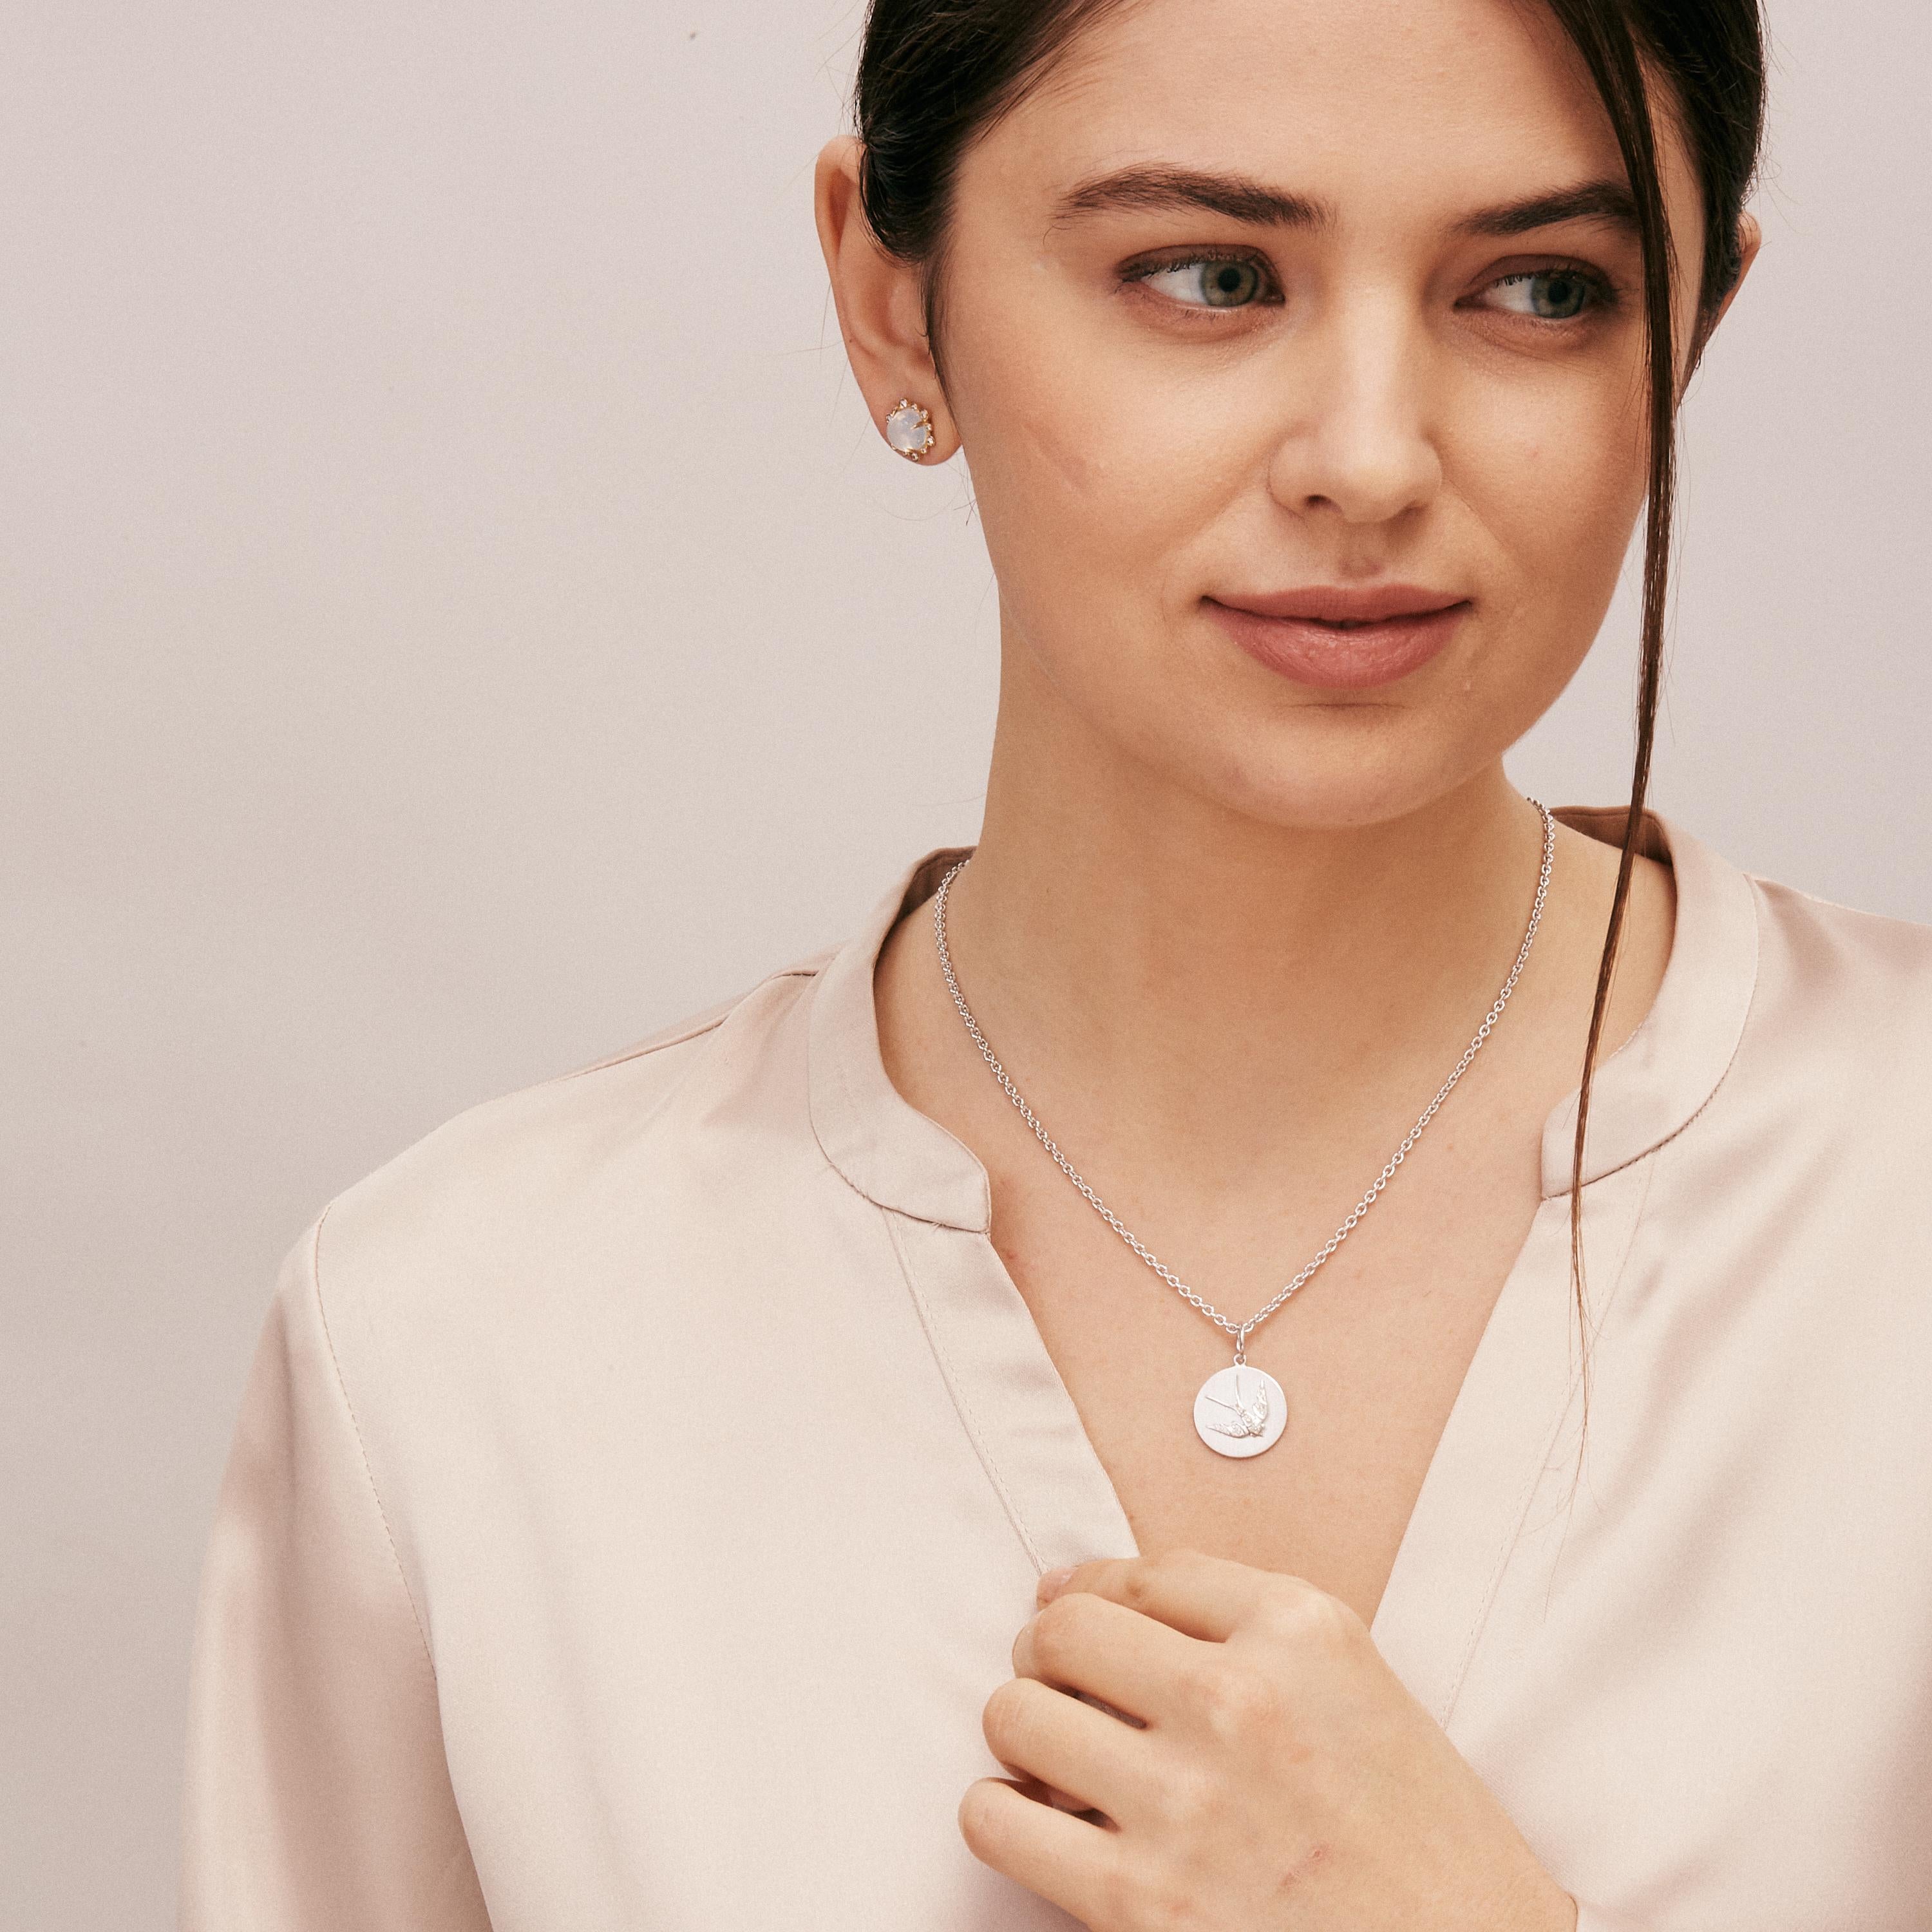 Created in 925 sterling silver
Diamonds 0.09 carat approx.
Satin finish background
Limited edition
Chain sold separately

Sculpted with 925 sterling silver, these gems sparkle with ~0.09 ct of diamonds! A satin backdrop adds a luxe touch to this